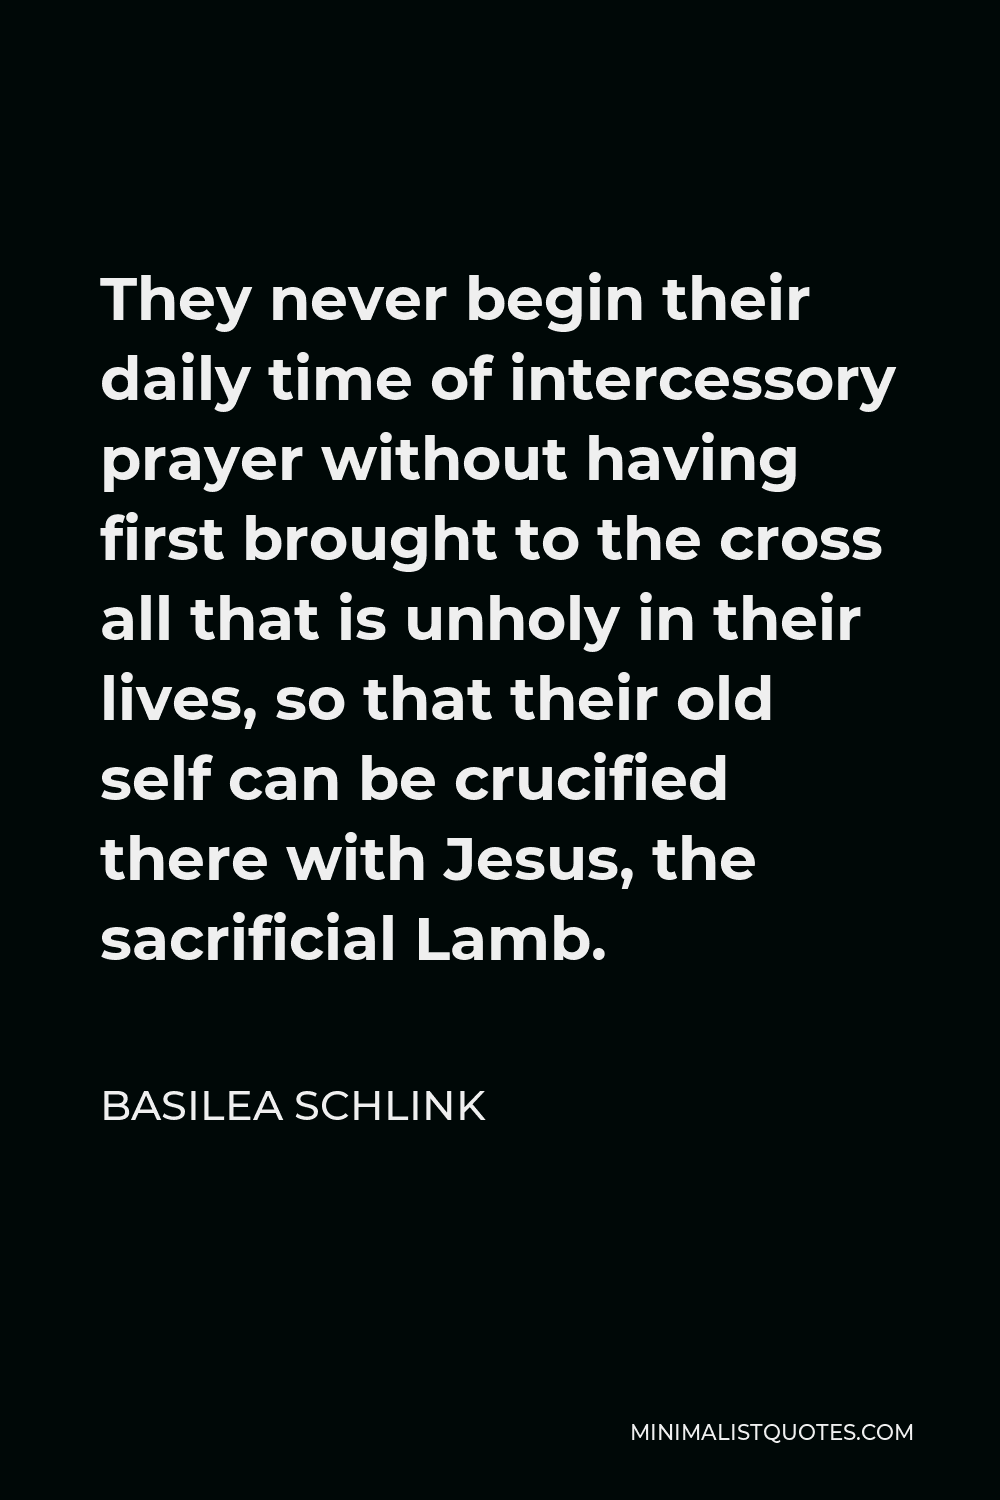 Basilea Schlink Quote - They never begin their daily time of intercessory prayer without having first brought to the cross all that is unholy in their lives, so that their old self can be crucified there with Jesus, the sacrificial Lamb.